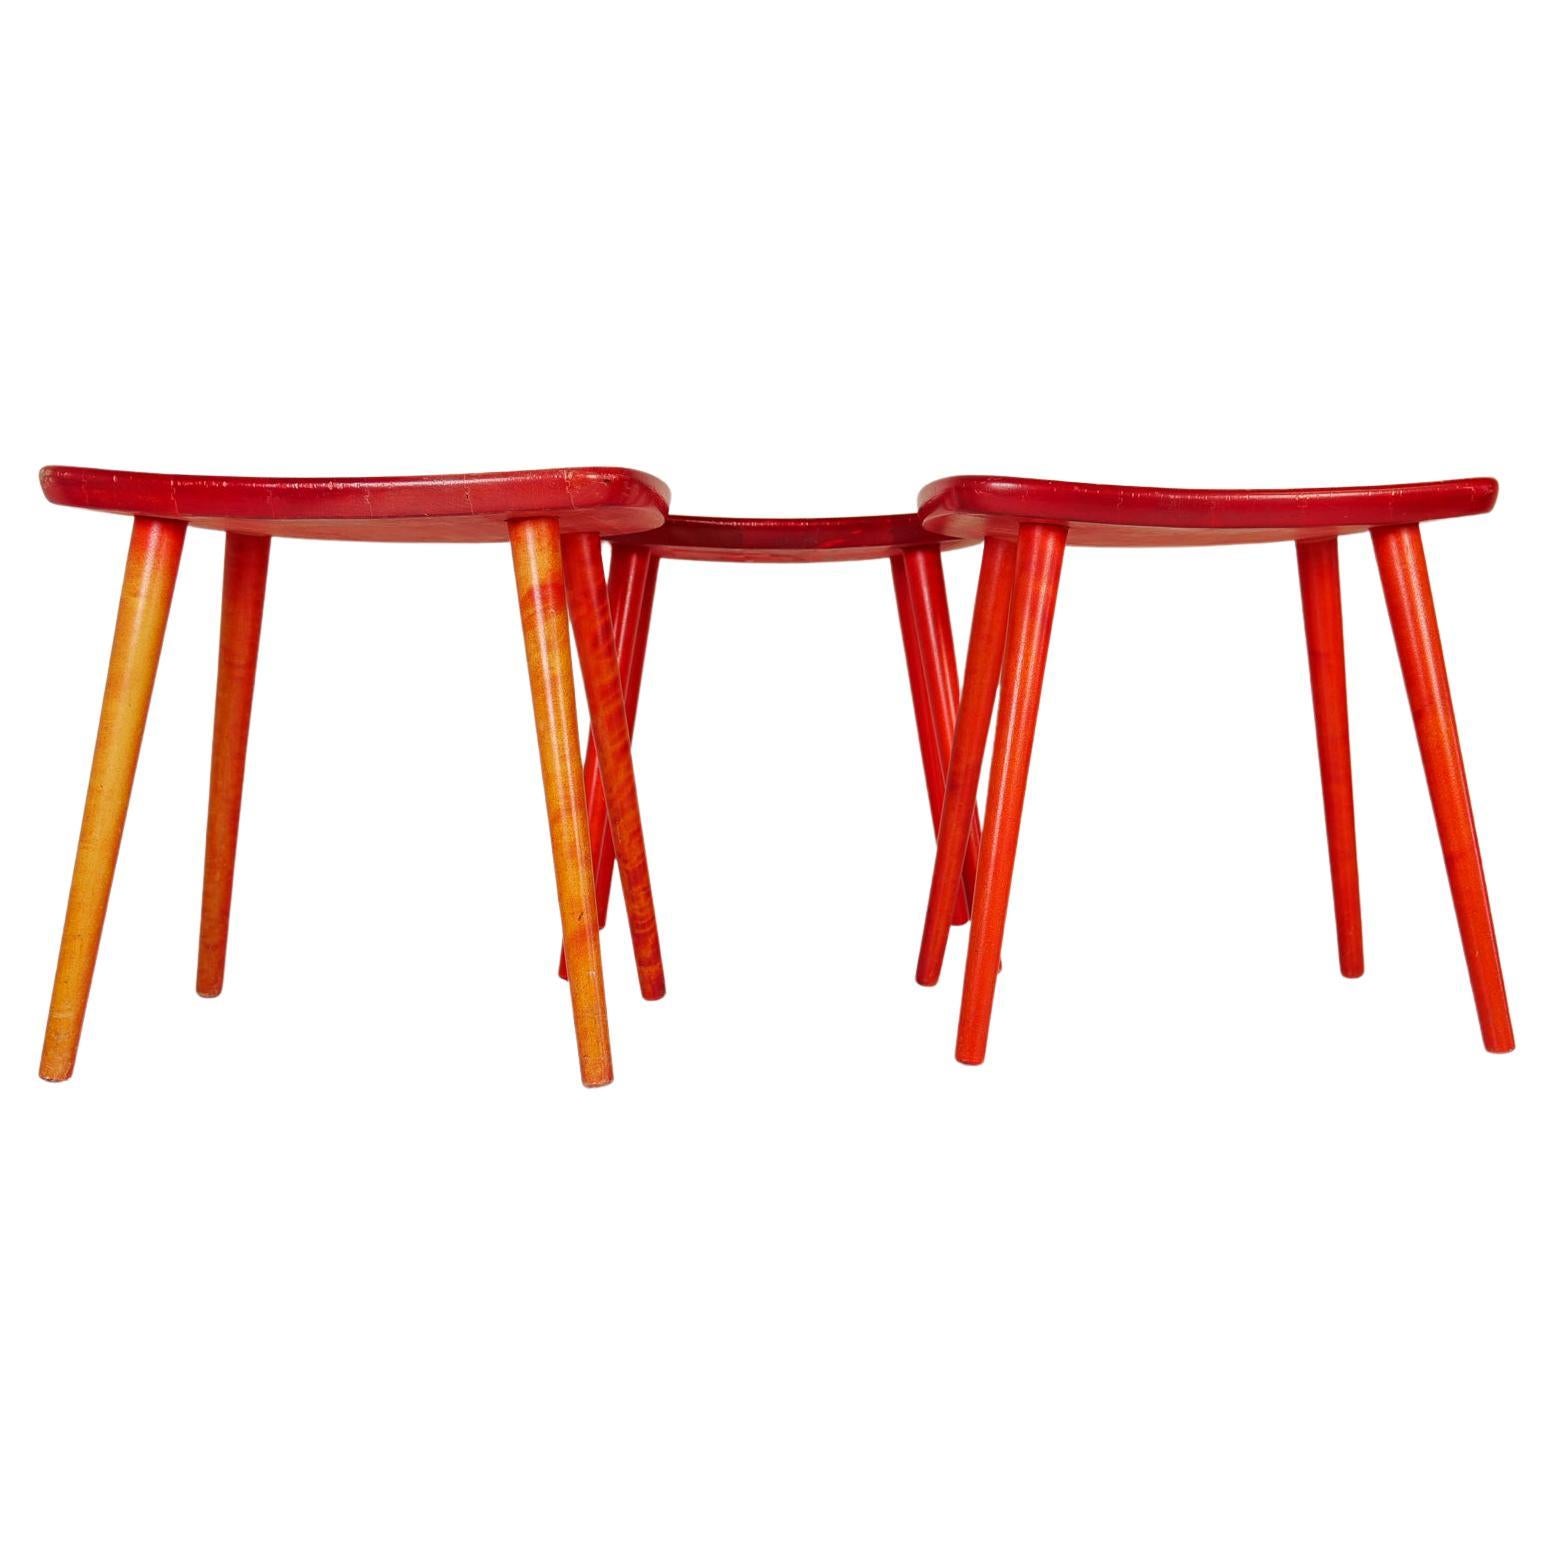 Swedish Stools in lacquered Red Birch, Yngve Ekström "Palle", 1970s For Sale